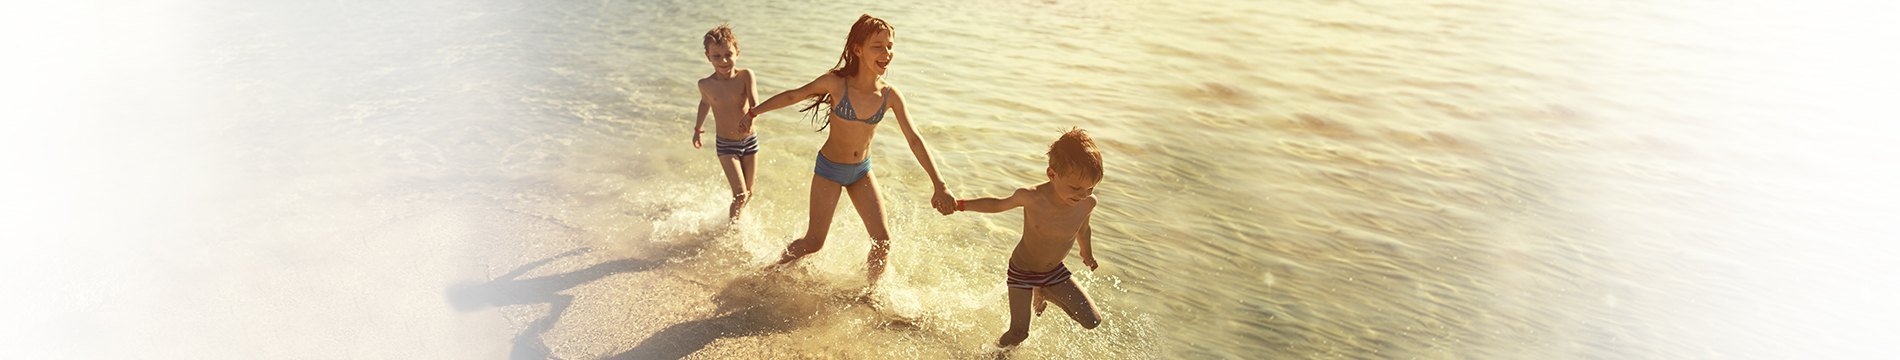 Article 7 8 Ways to Protect your Kids from the Sun this Summer